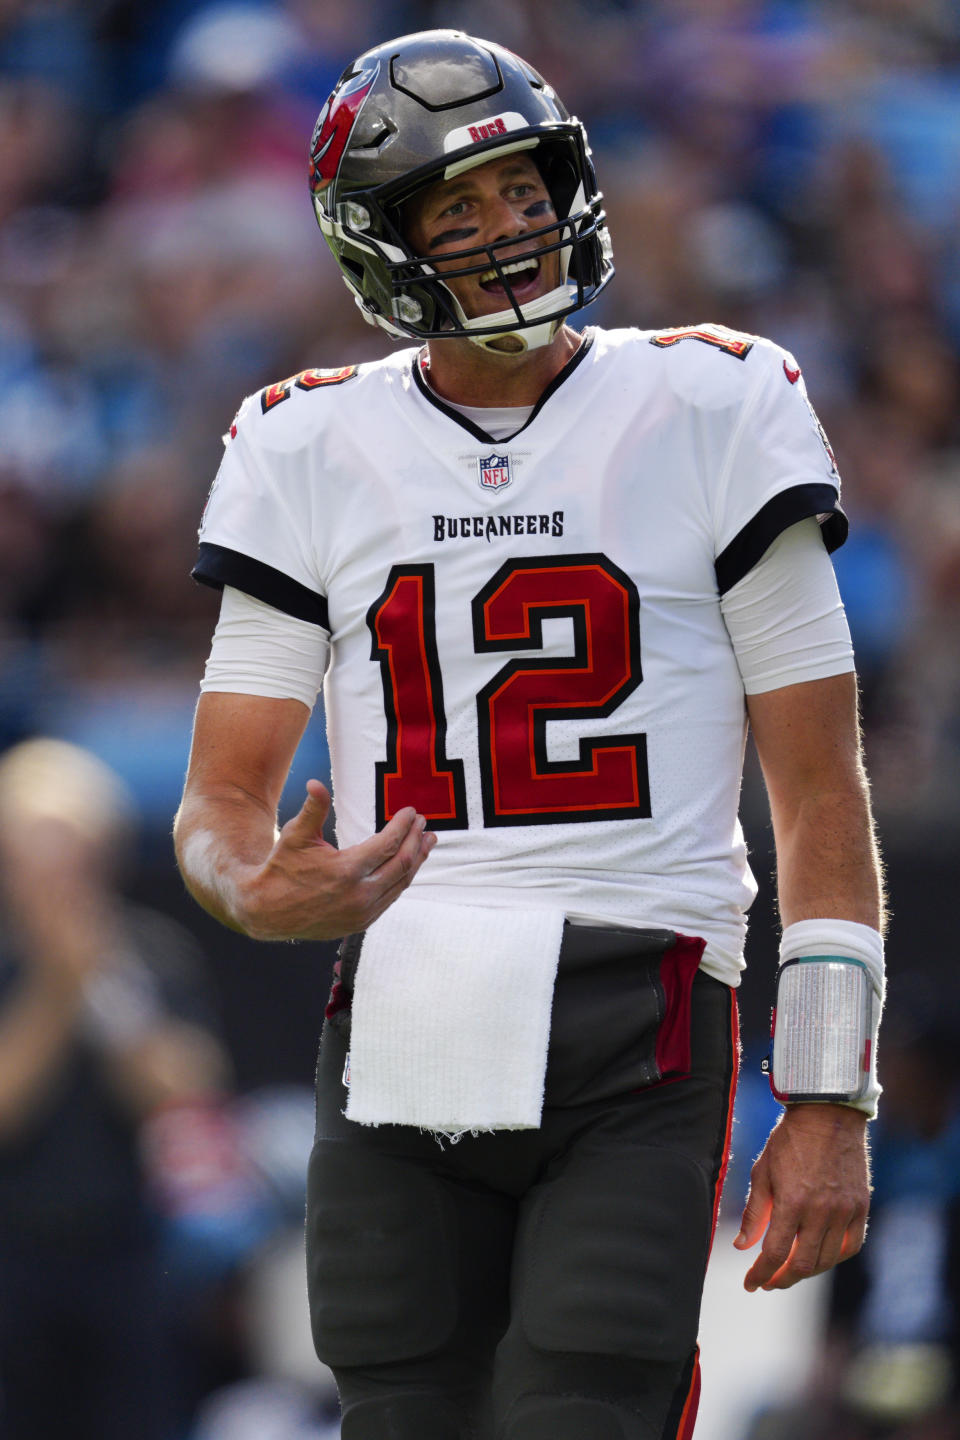 Tampa Bay Buccaneers quarterback Tom Brady reacts during the first half of an NFL football game against the Carolina Panthers Sunday, Dec. 26, 2021, in Charlotte, N.C. (AP Photo/Jacob Kupferman)